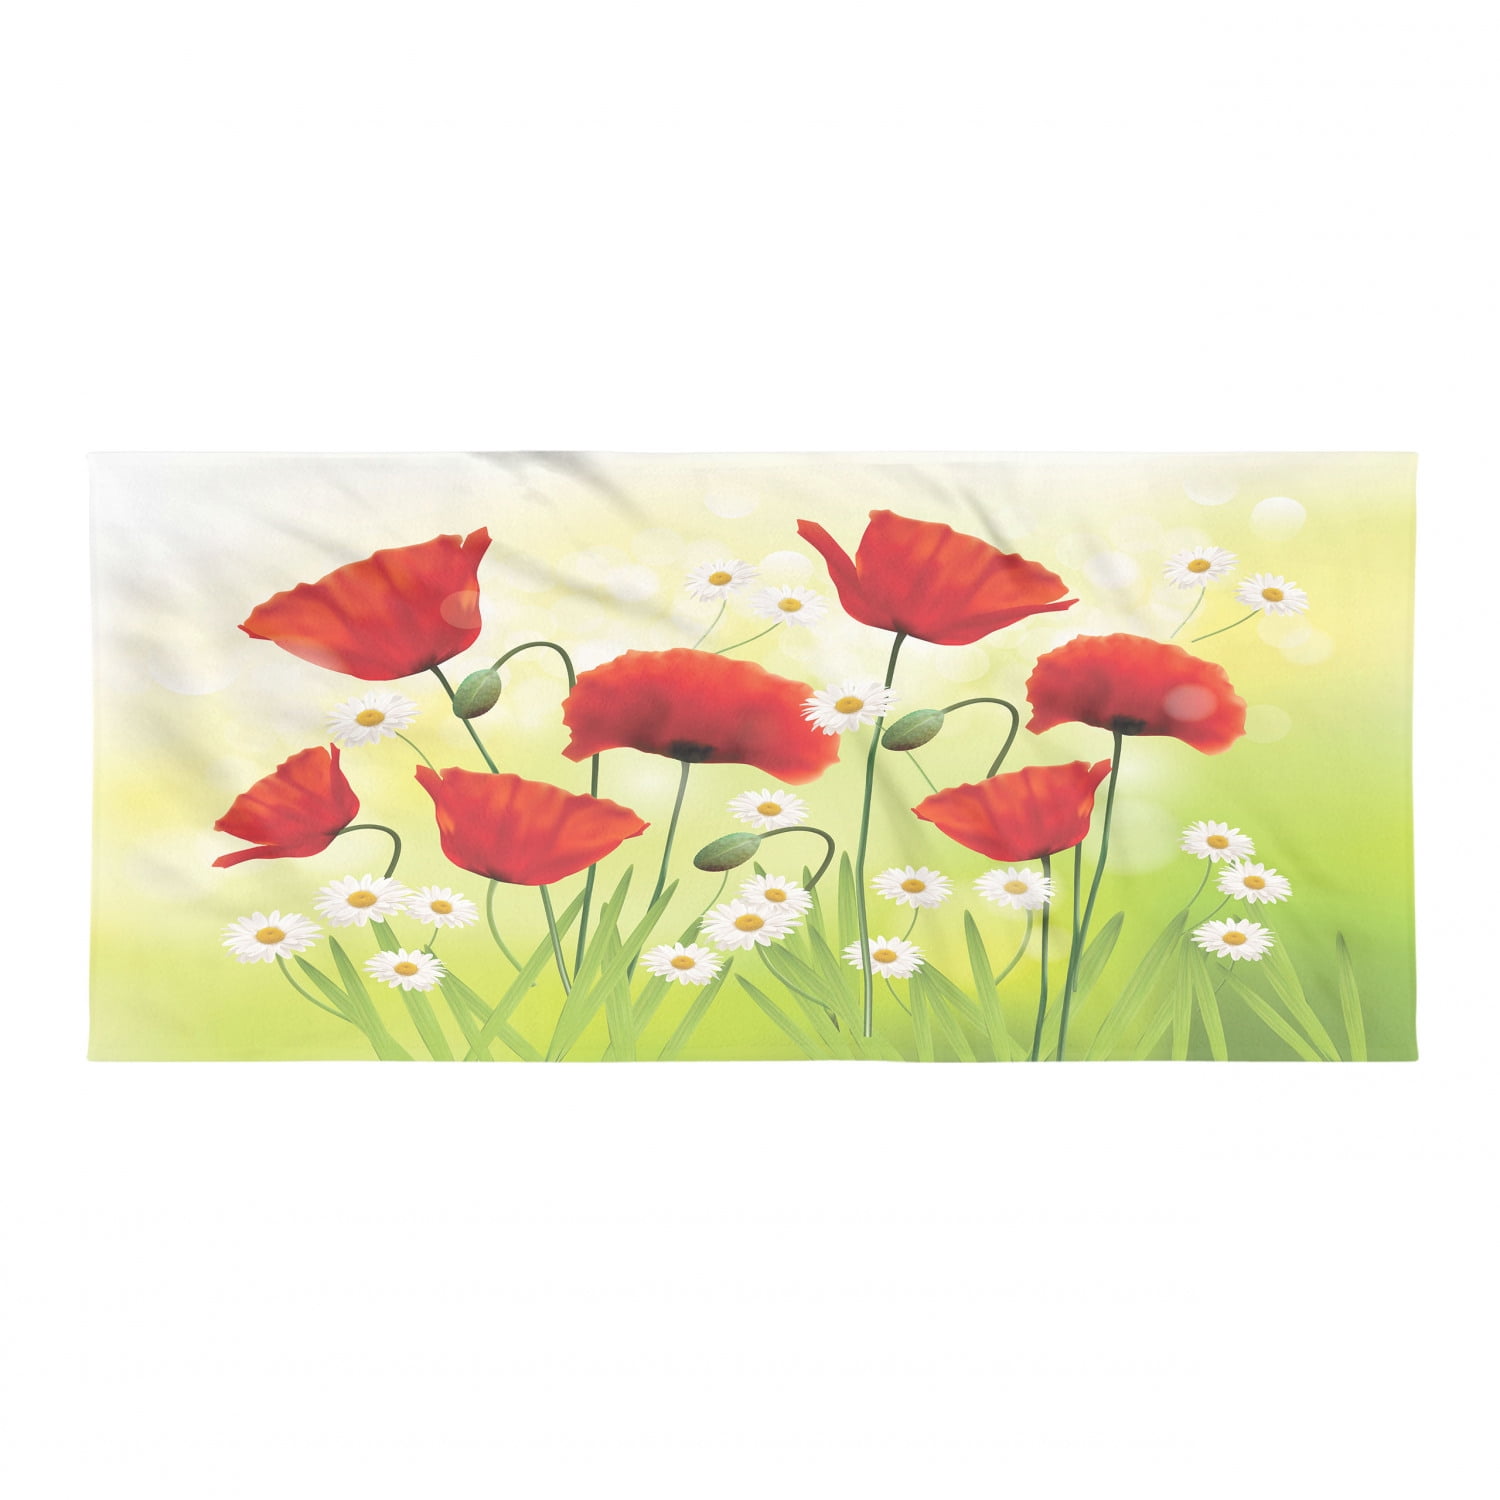 Details about   Kitchen Towel Floral Flowers Poppies Dual Purpose